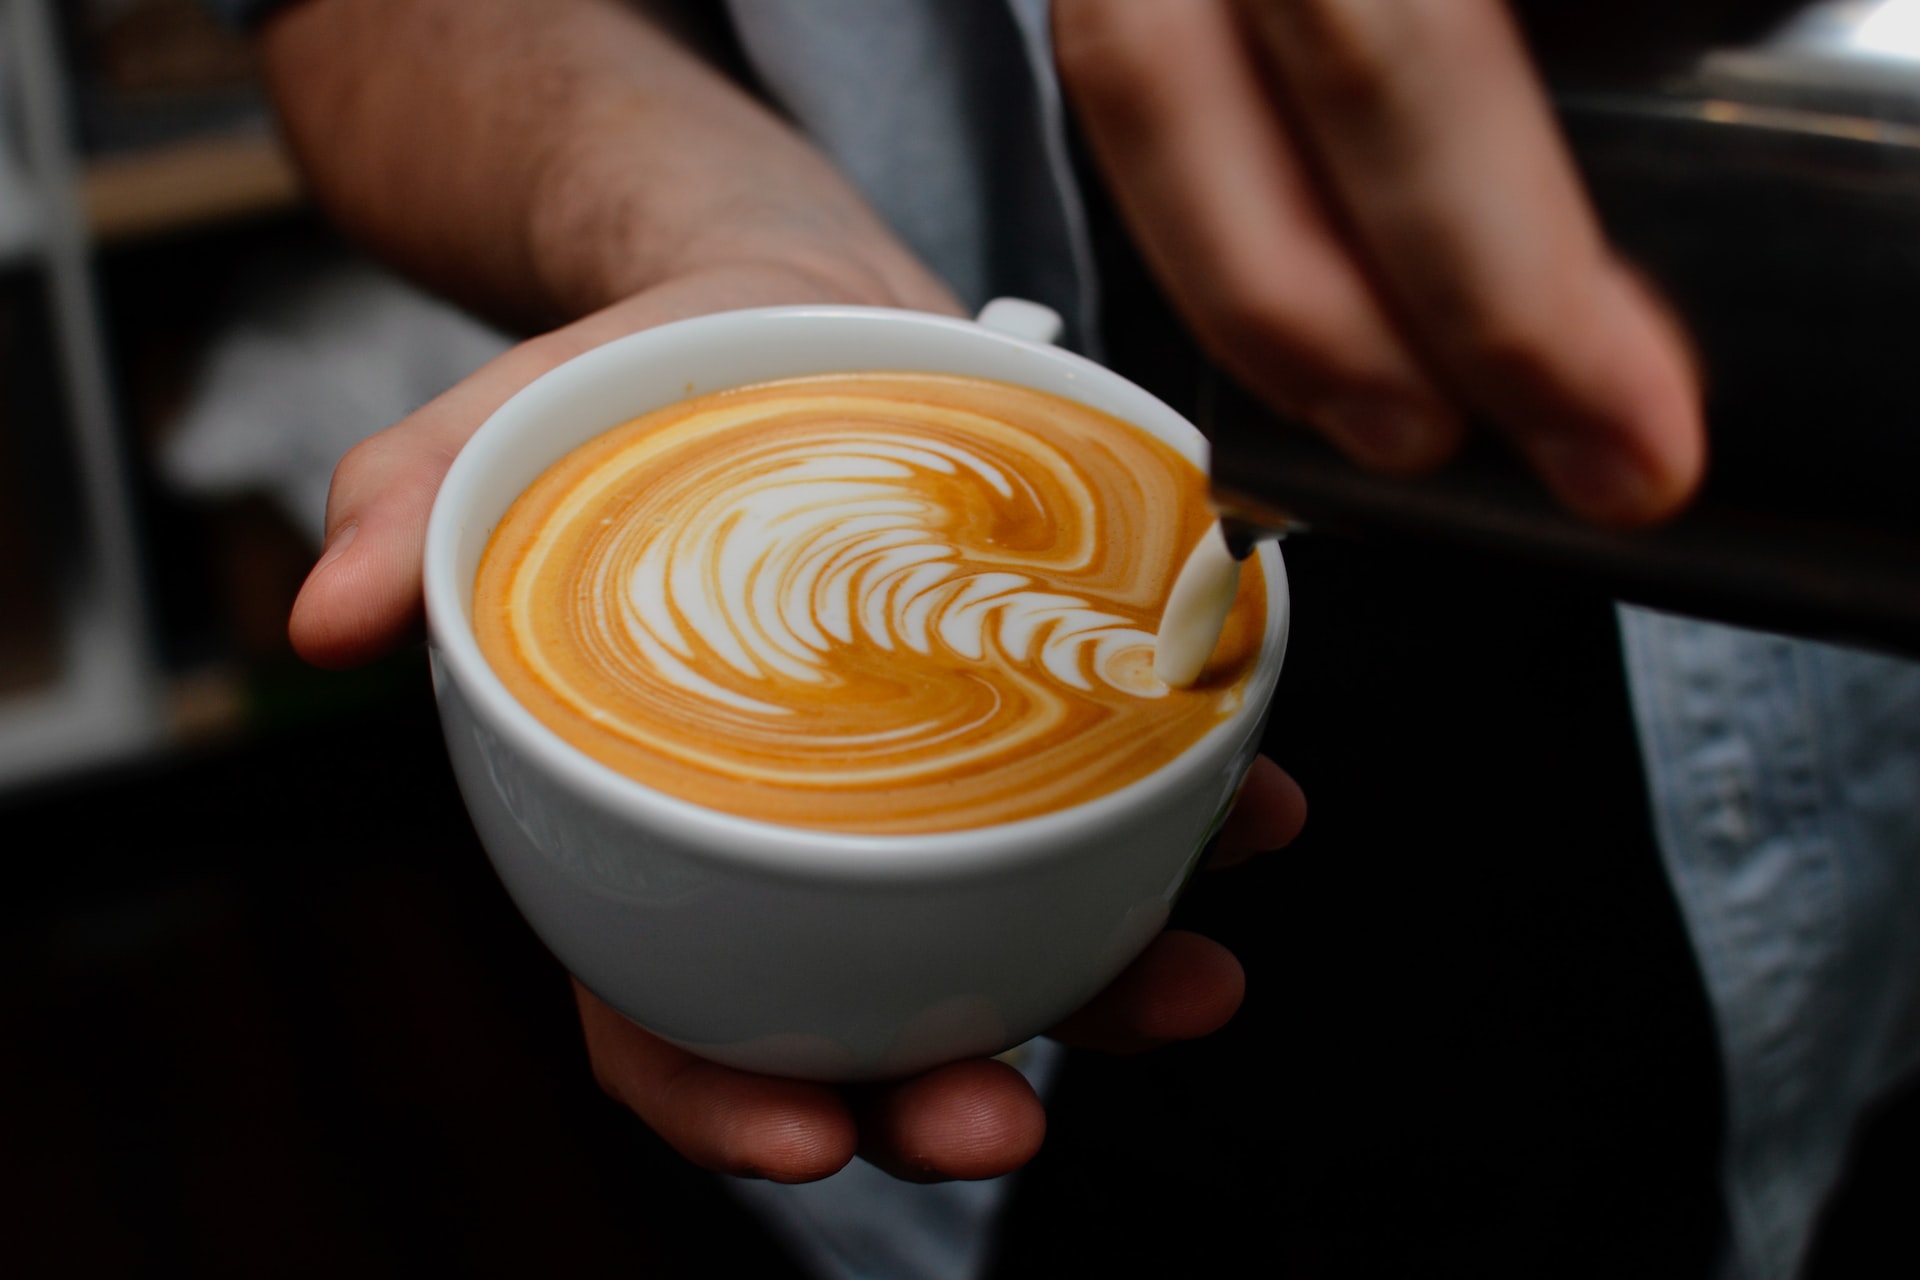 Guide to Latte Art